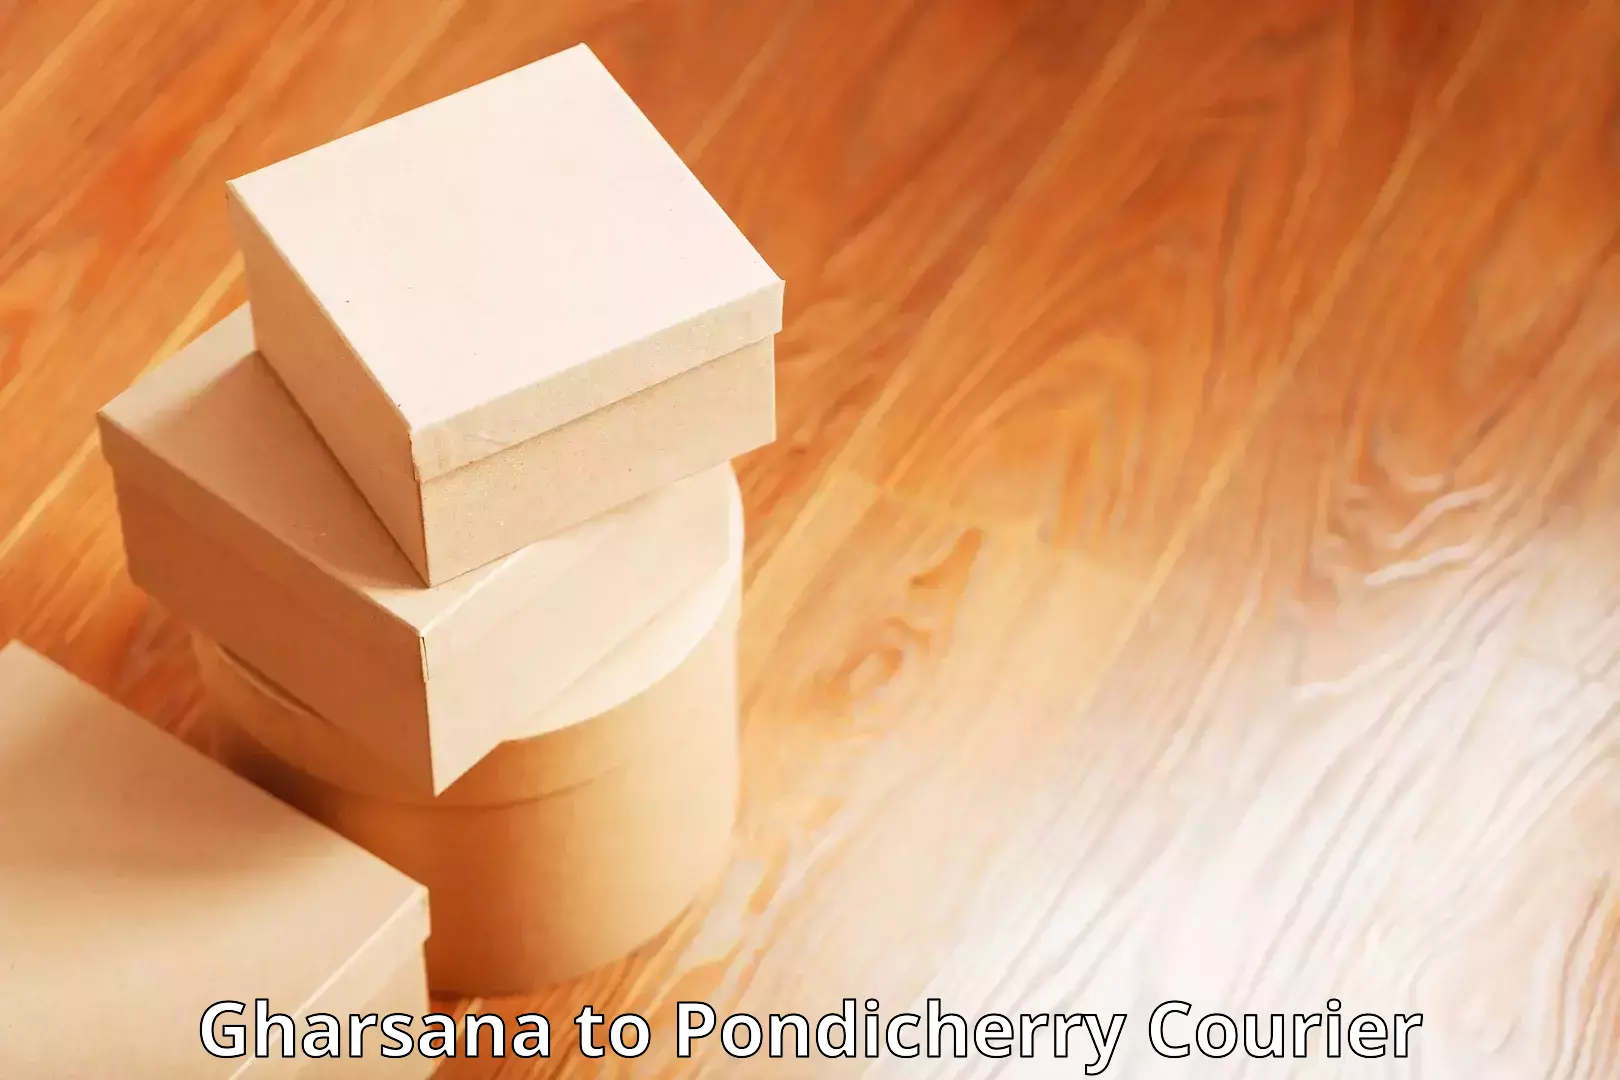 Courier service booking Gharsana to Pondicherry